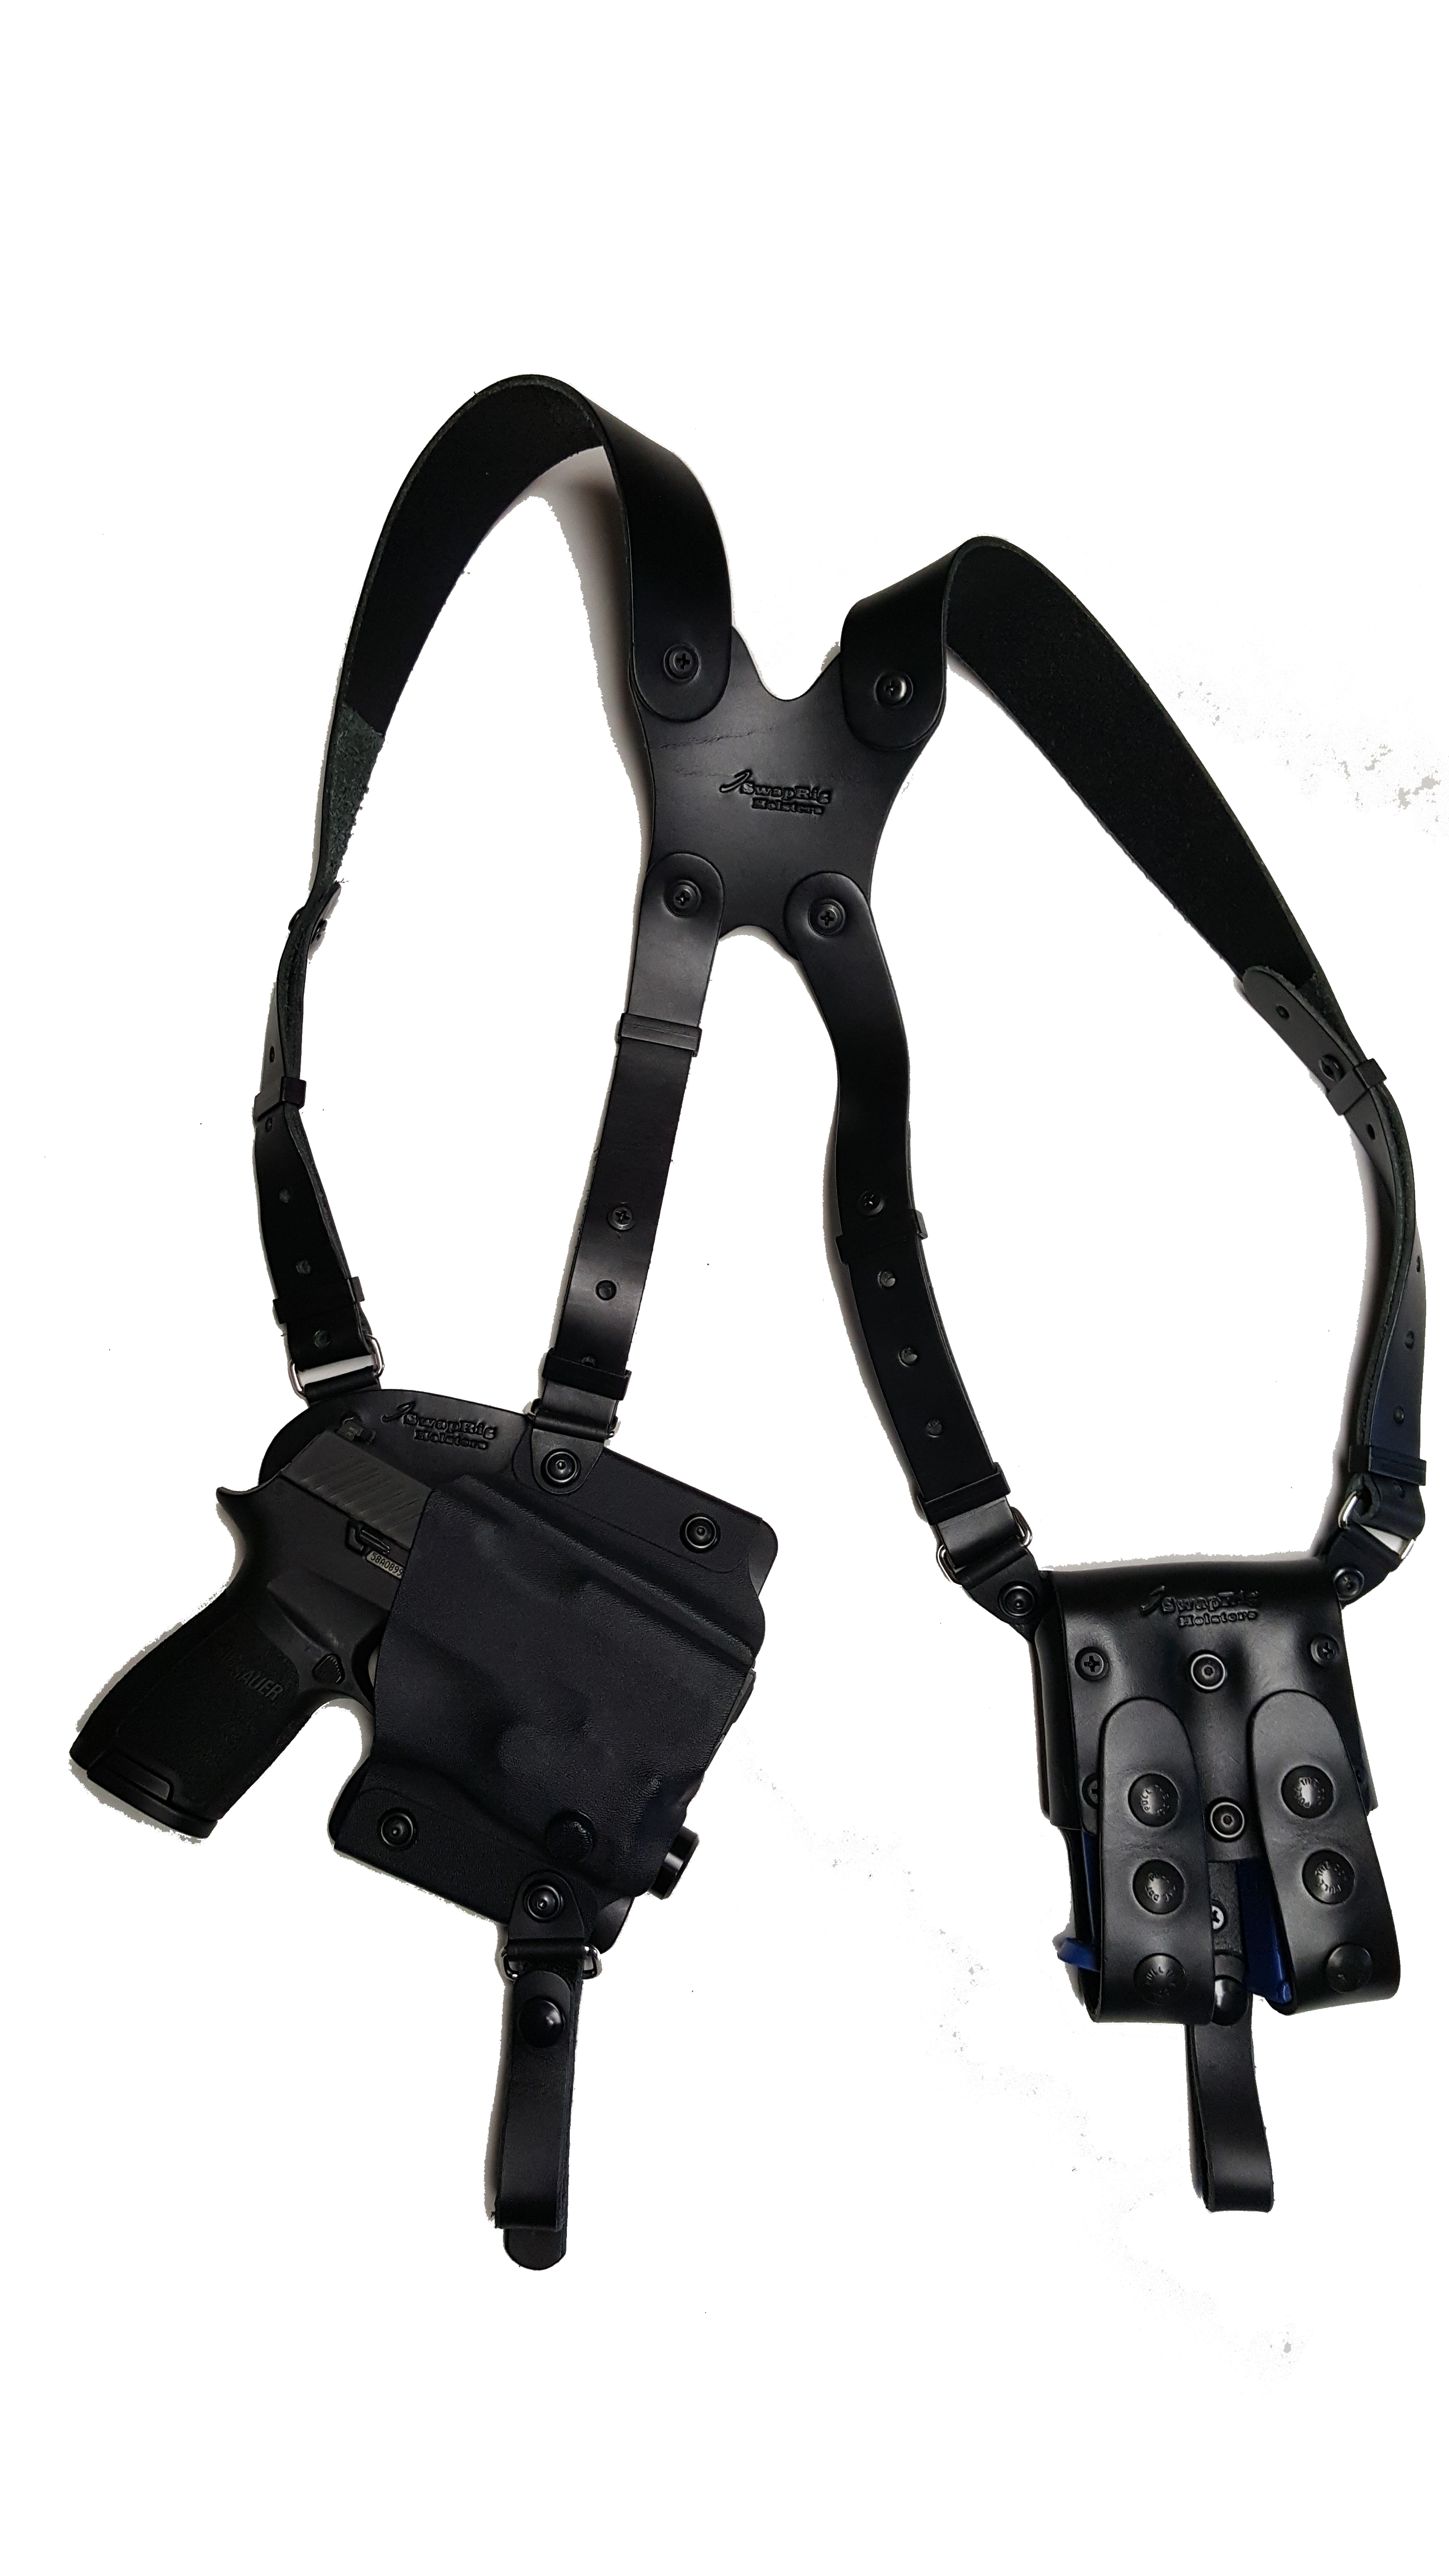 Bulldog Horizontal Shoulder Holster for Sub-compact Springfield XDM 9 Xd40 for sale online 